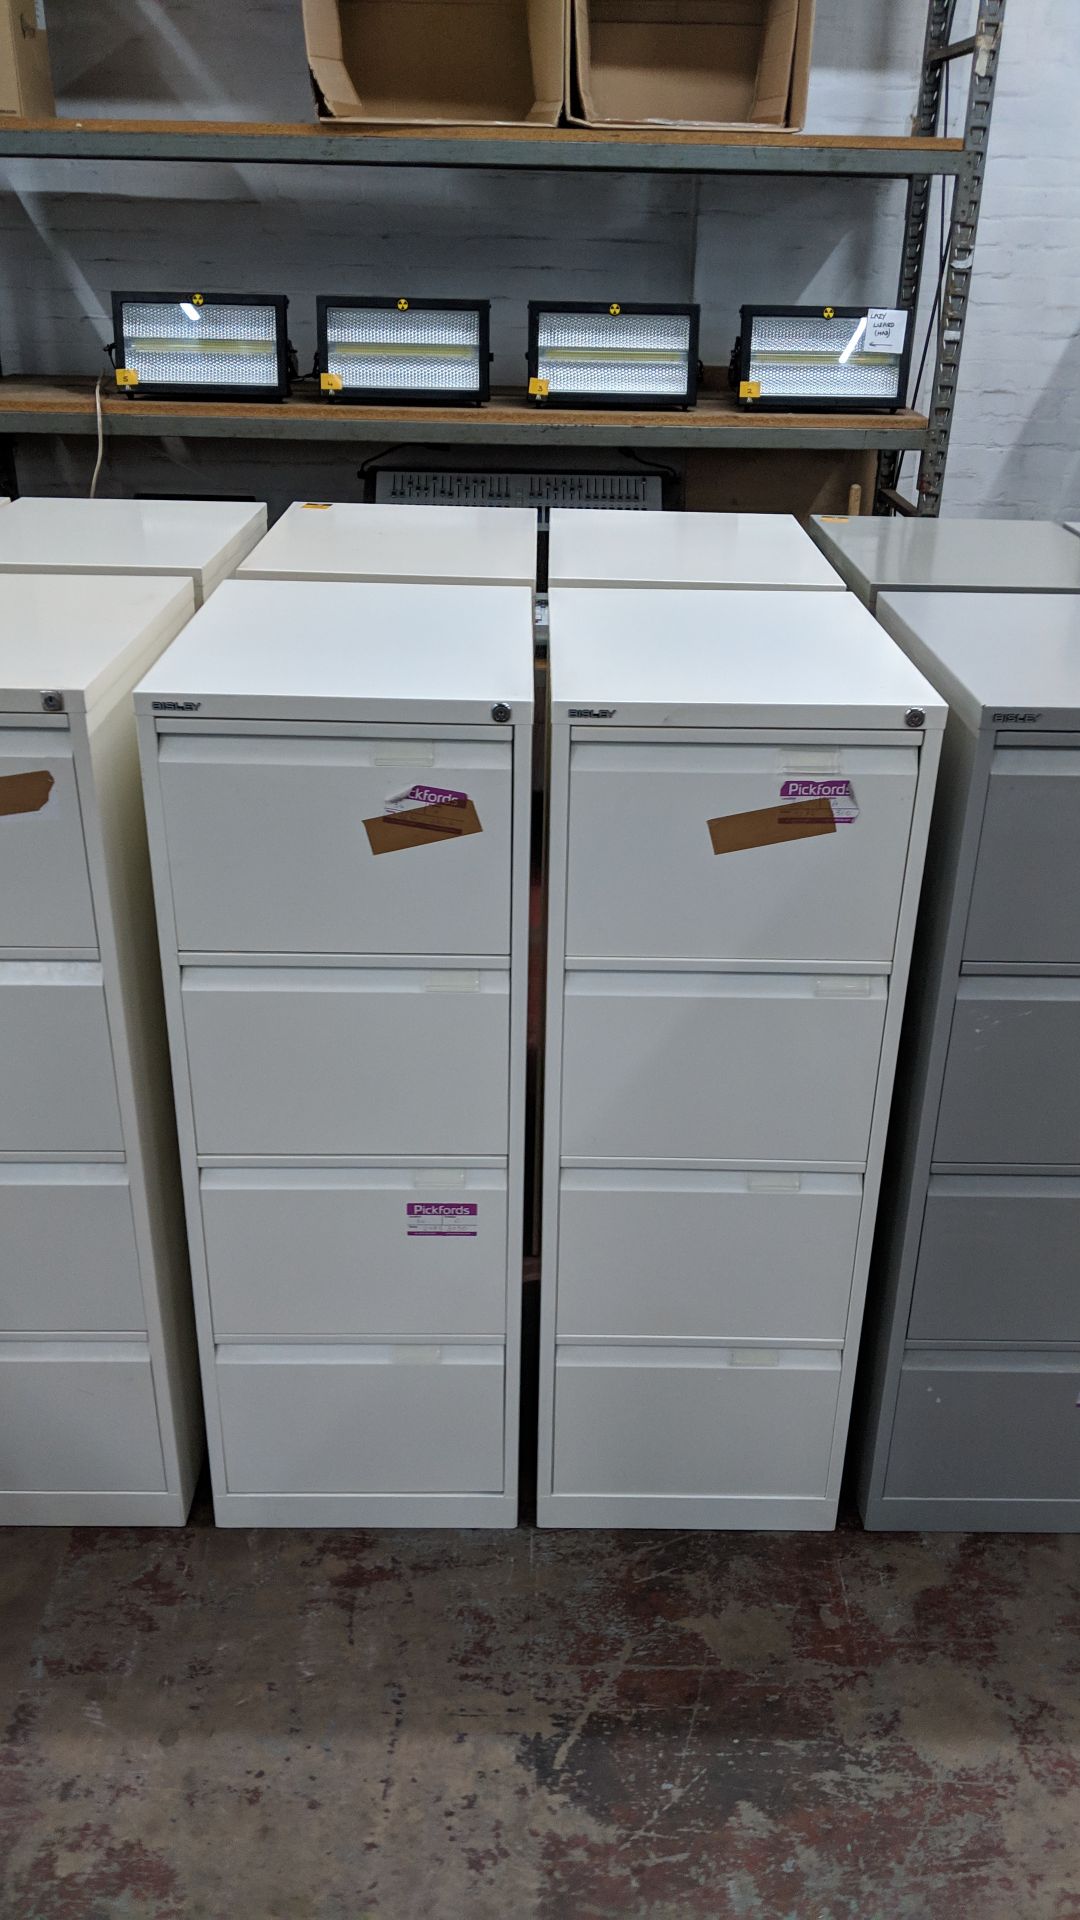 4 off Bisley off-white metal 4 drawer filing cabinets NB. One cabinet has a missing drawer - Image 5 of 7